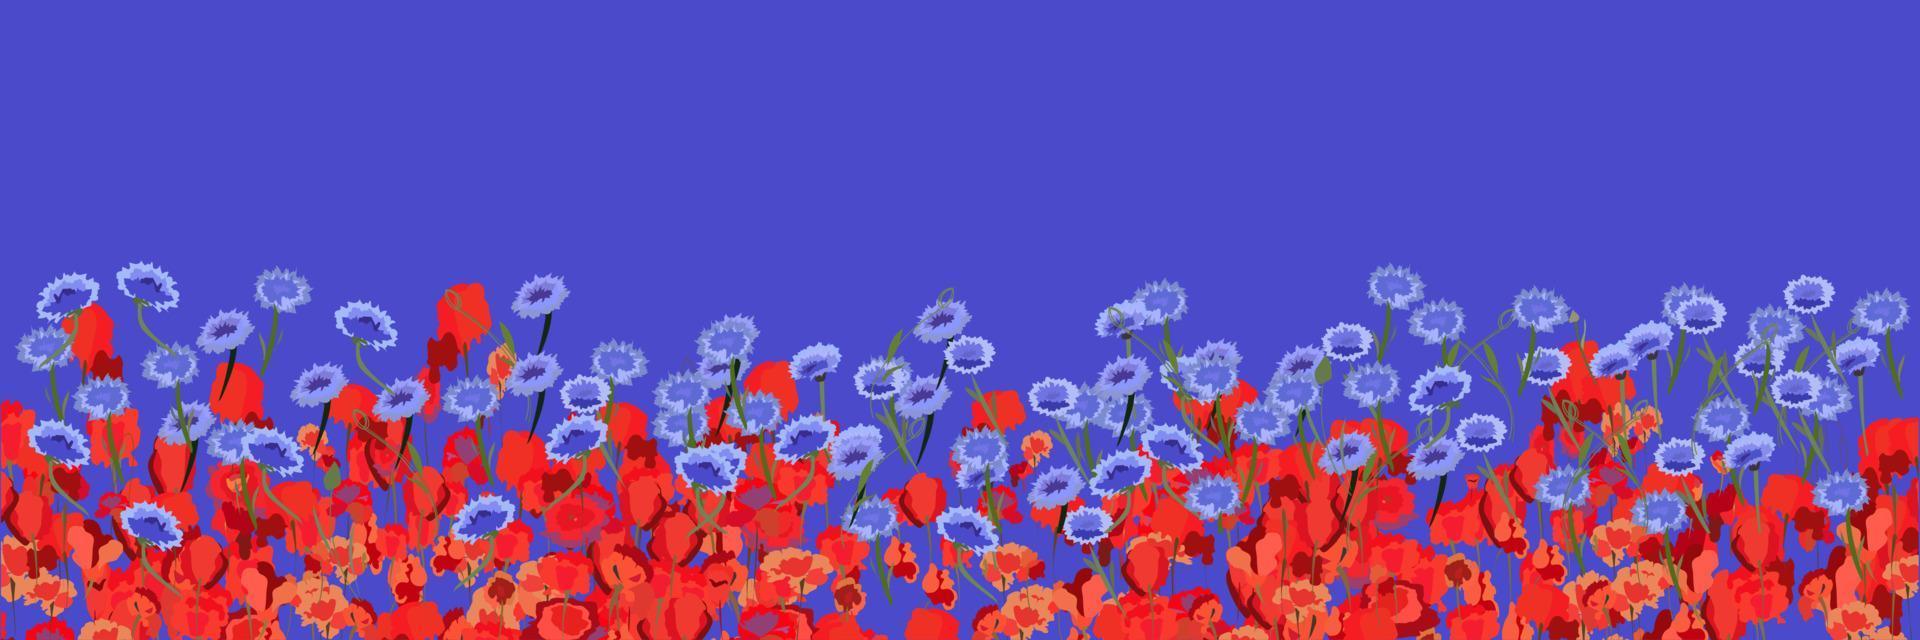 Background image of flowers on a background of poppies and cornflowers vector